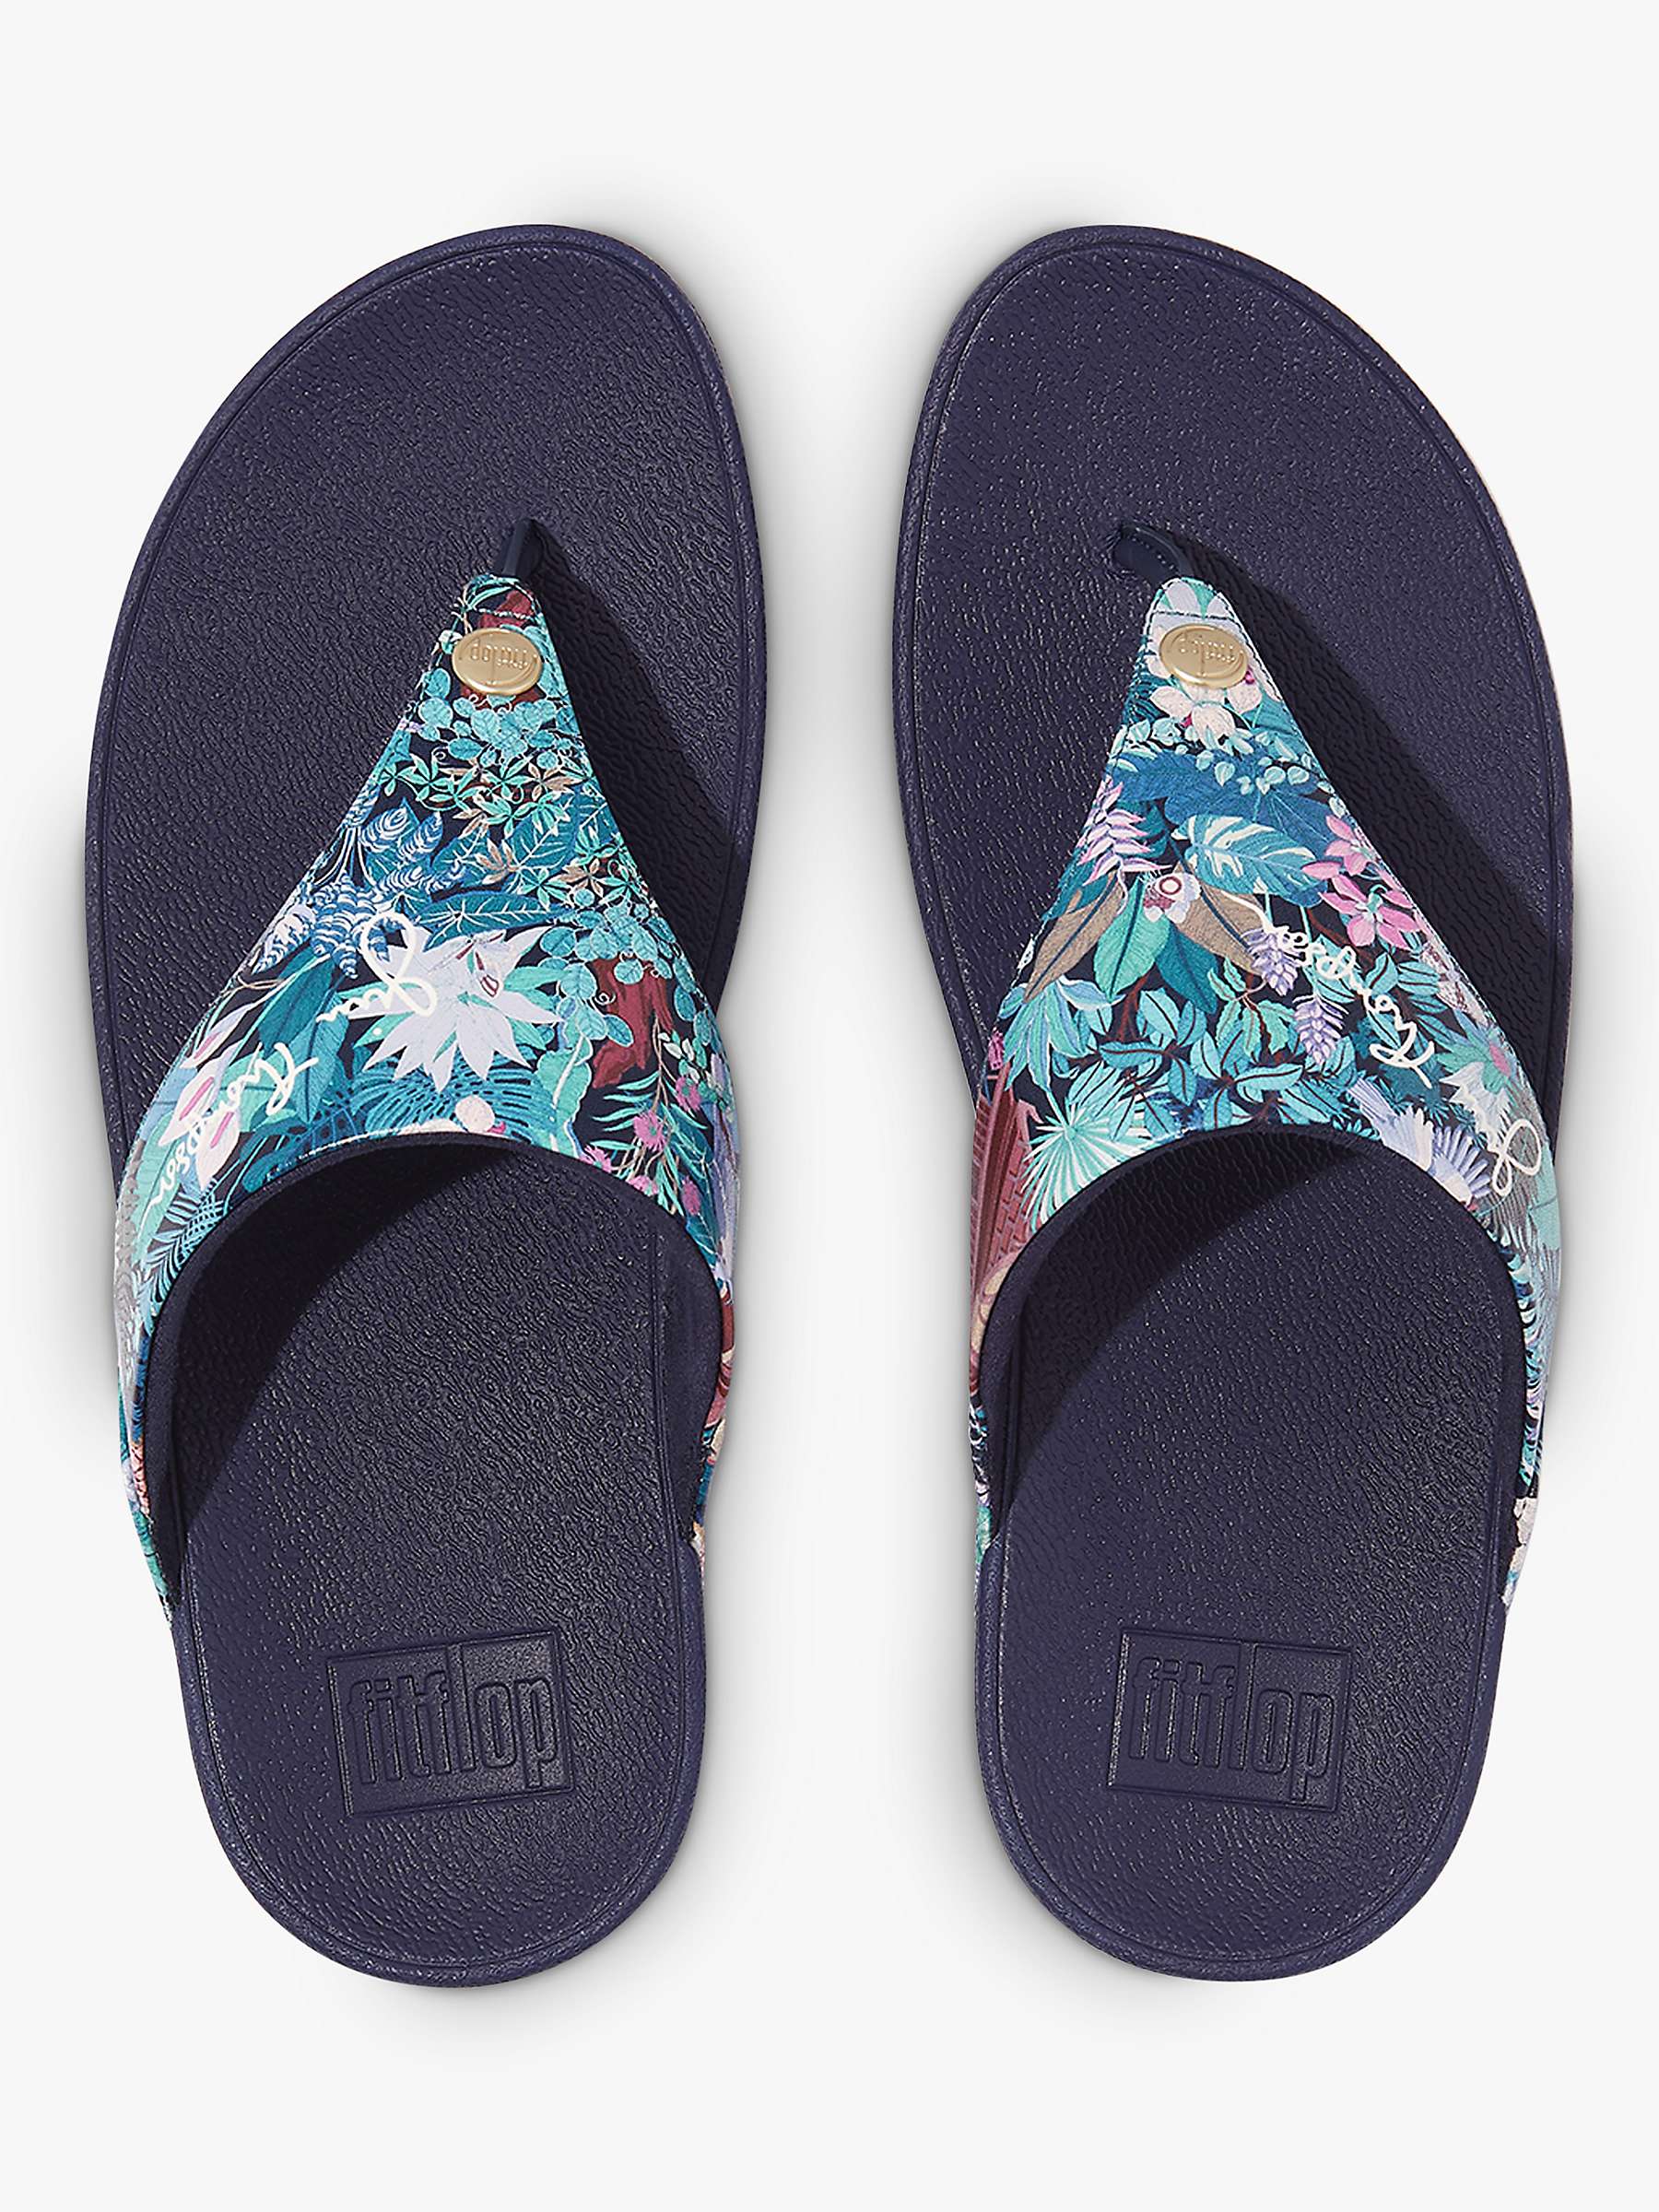 Buy FitFlop Jim Thompson Lulu Leather Toe Post Sandals, Heritage Blue Online at johnlewis.com